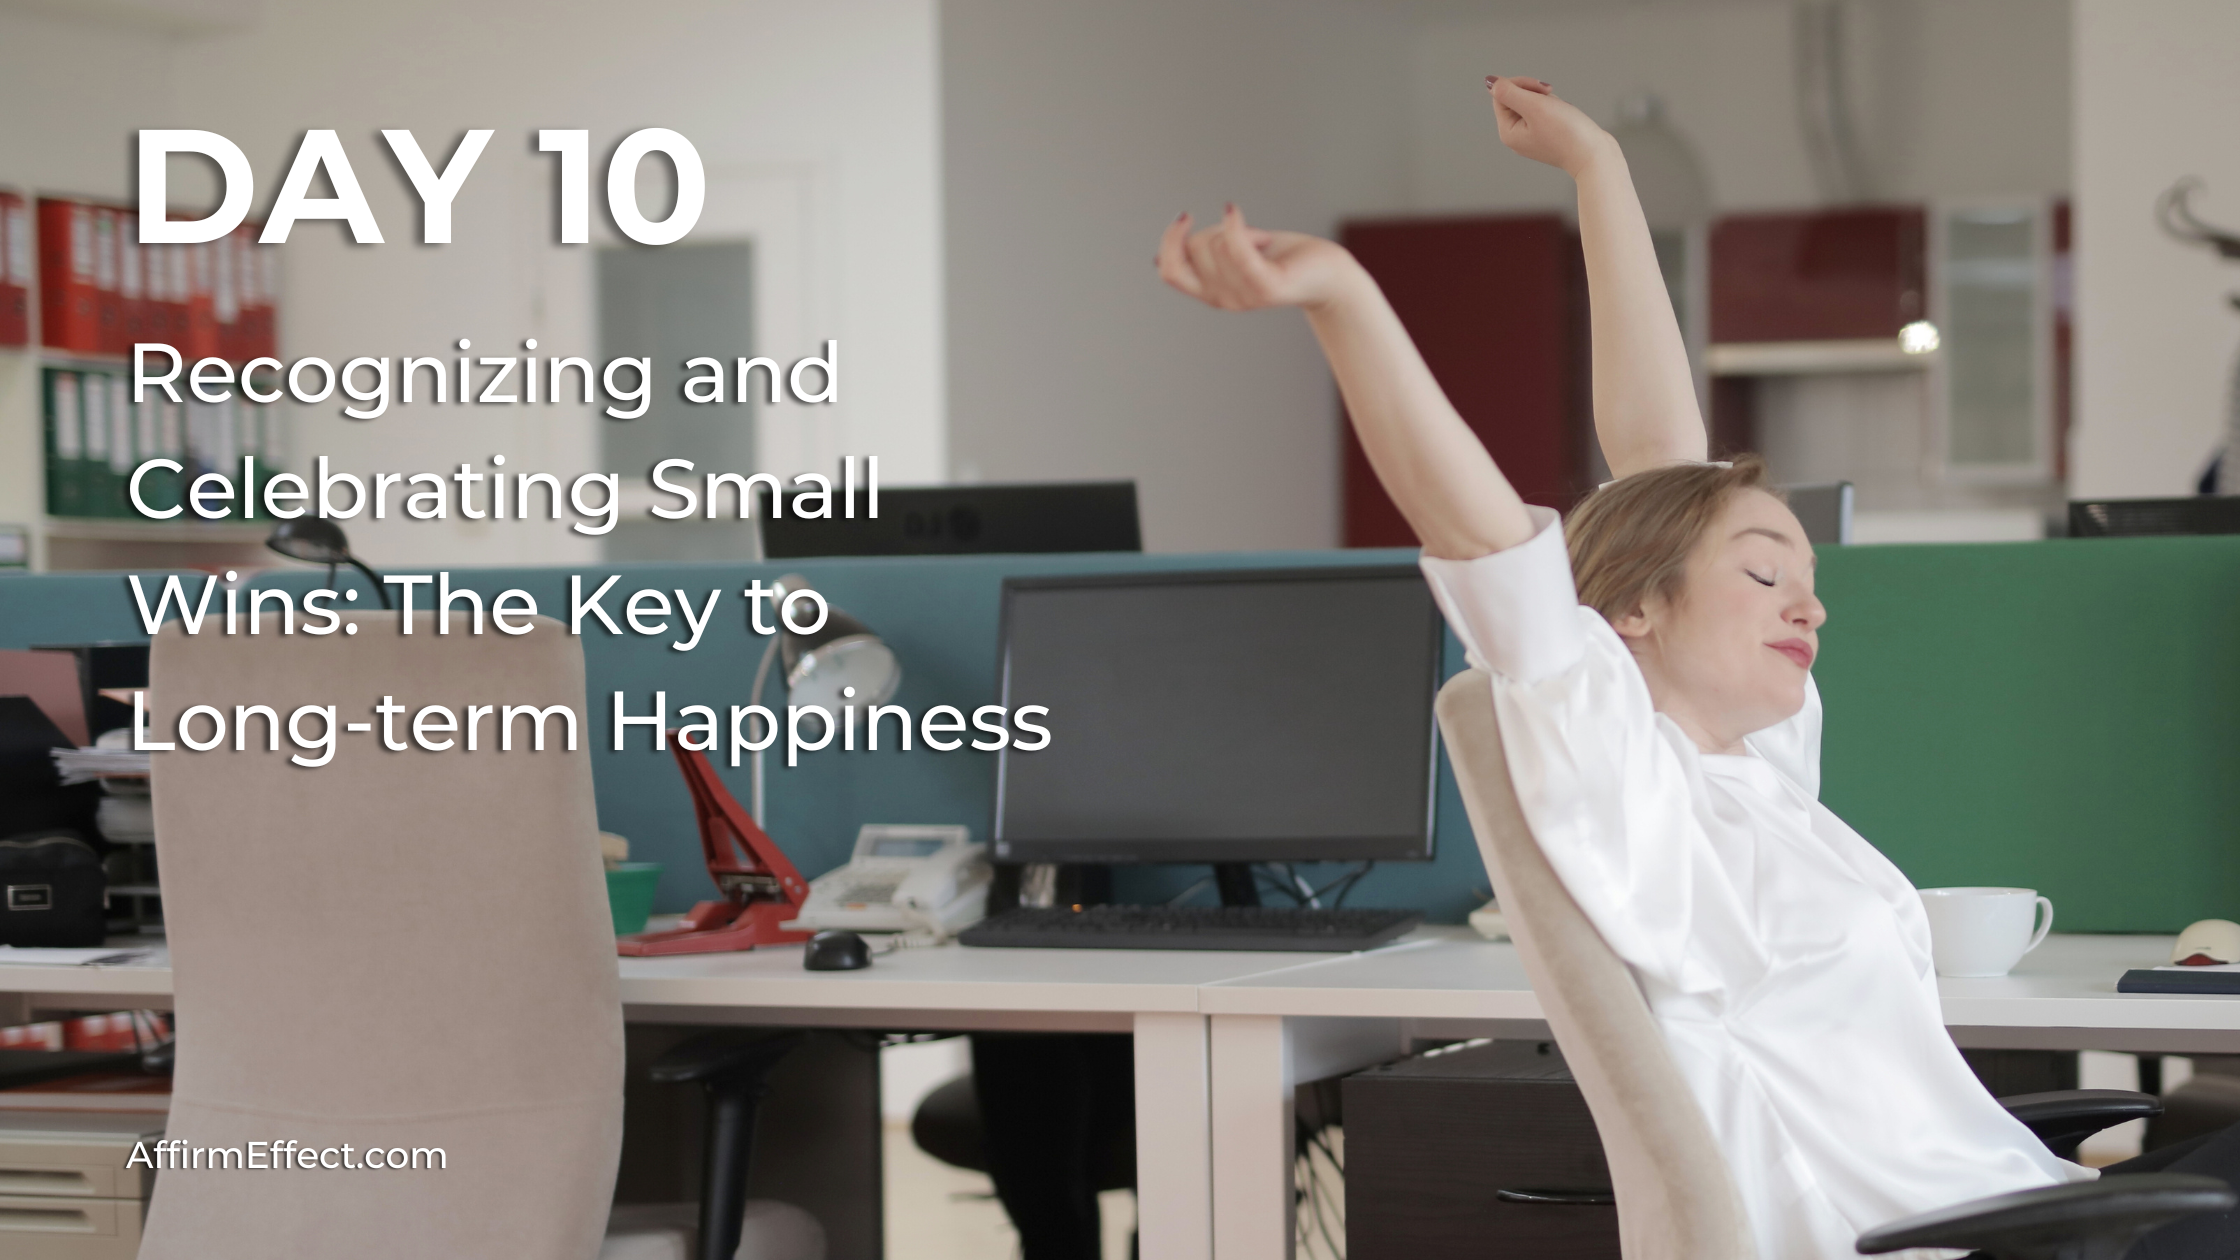 Day 10: Recognizing and Celebrating Small Wins: The Key to Long-term Happiness